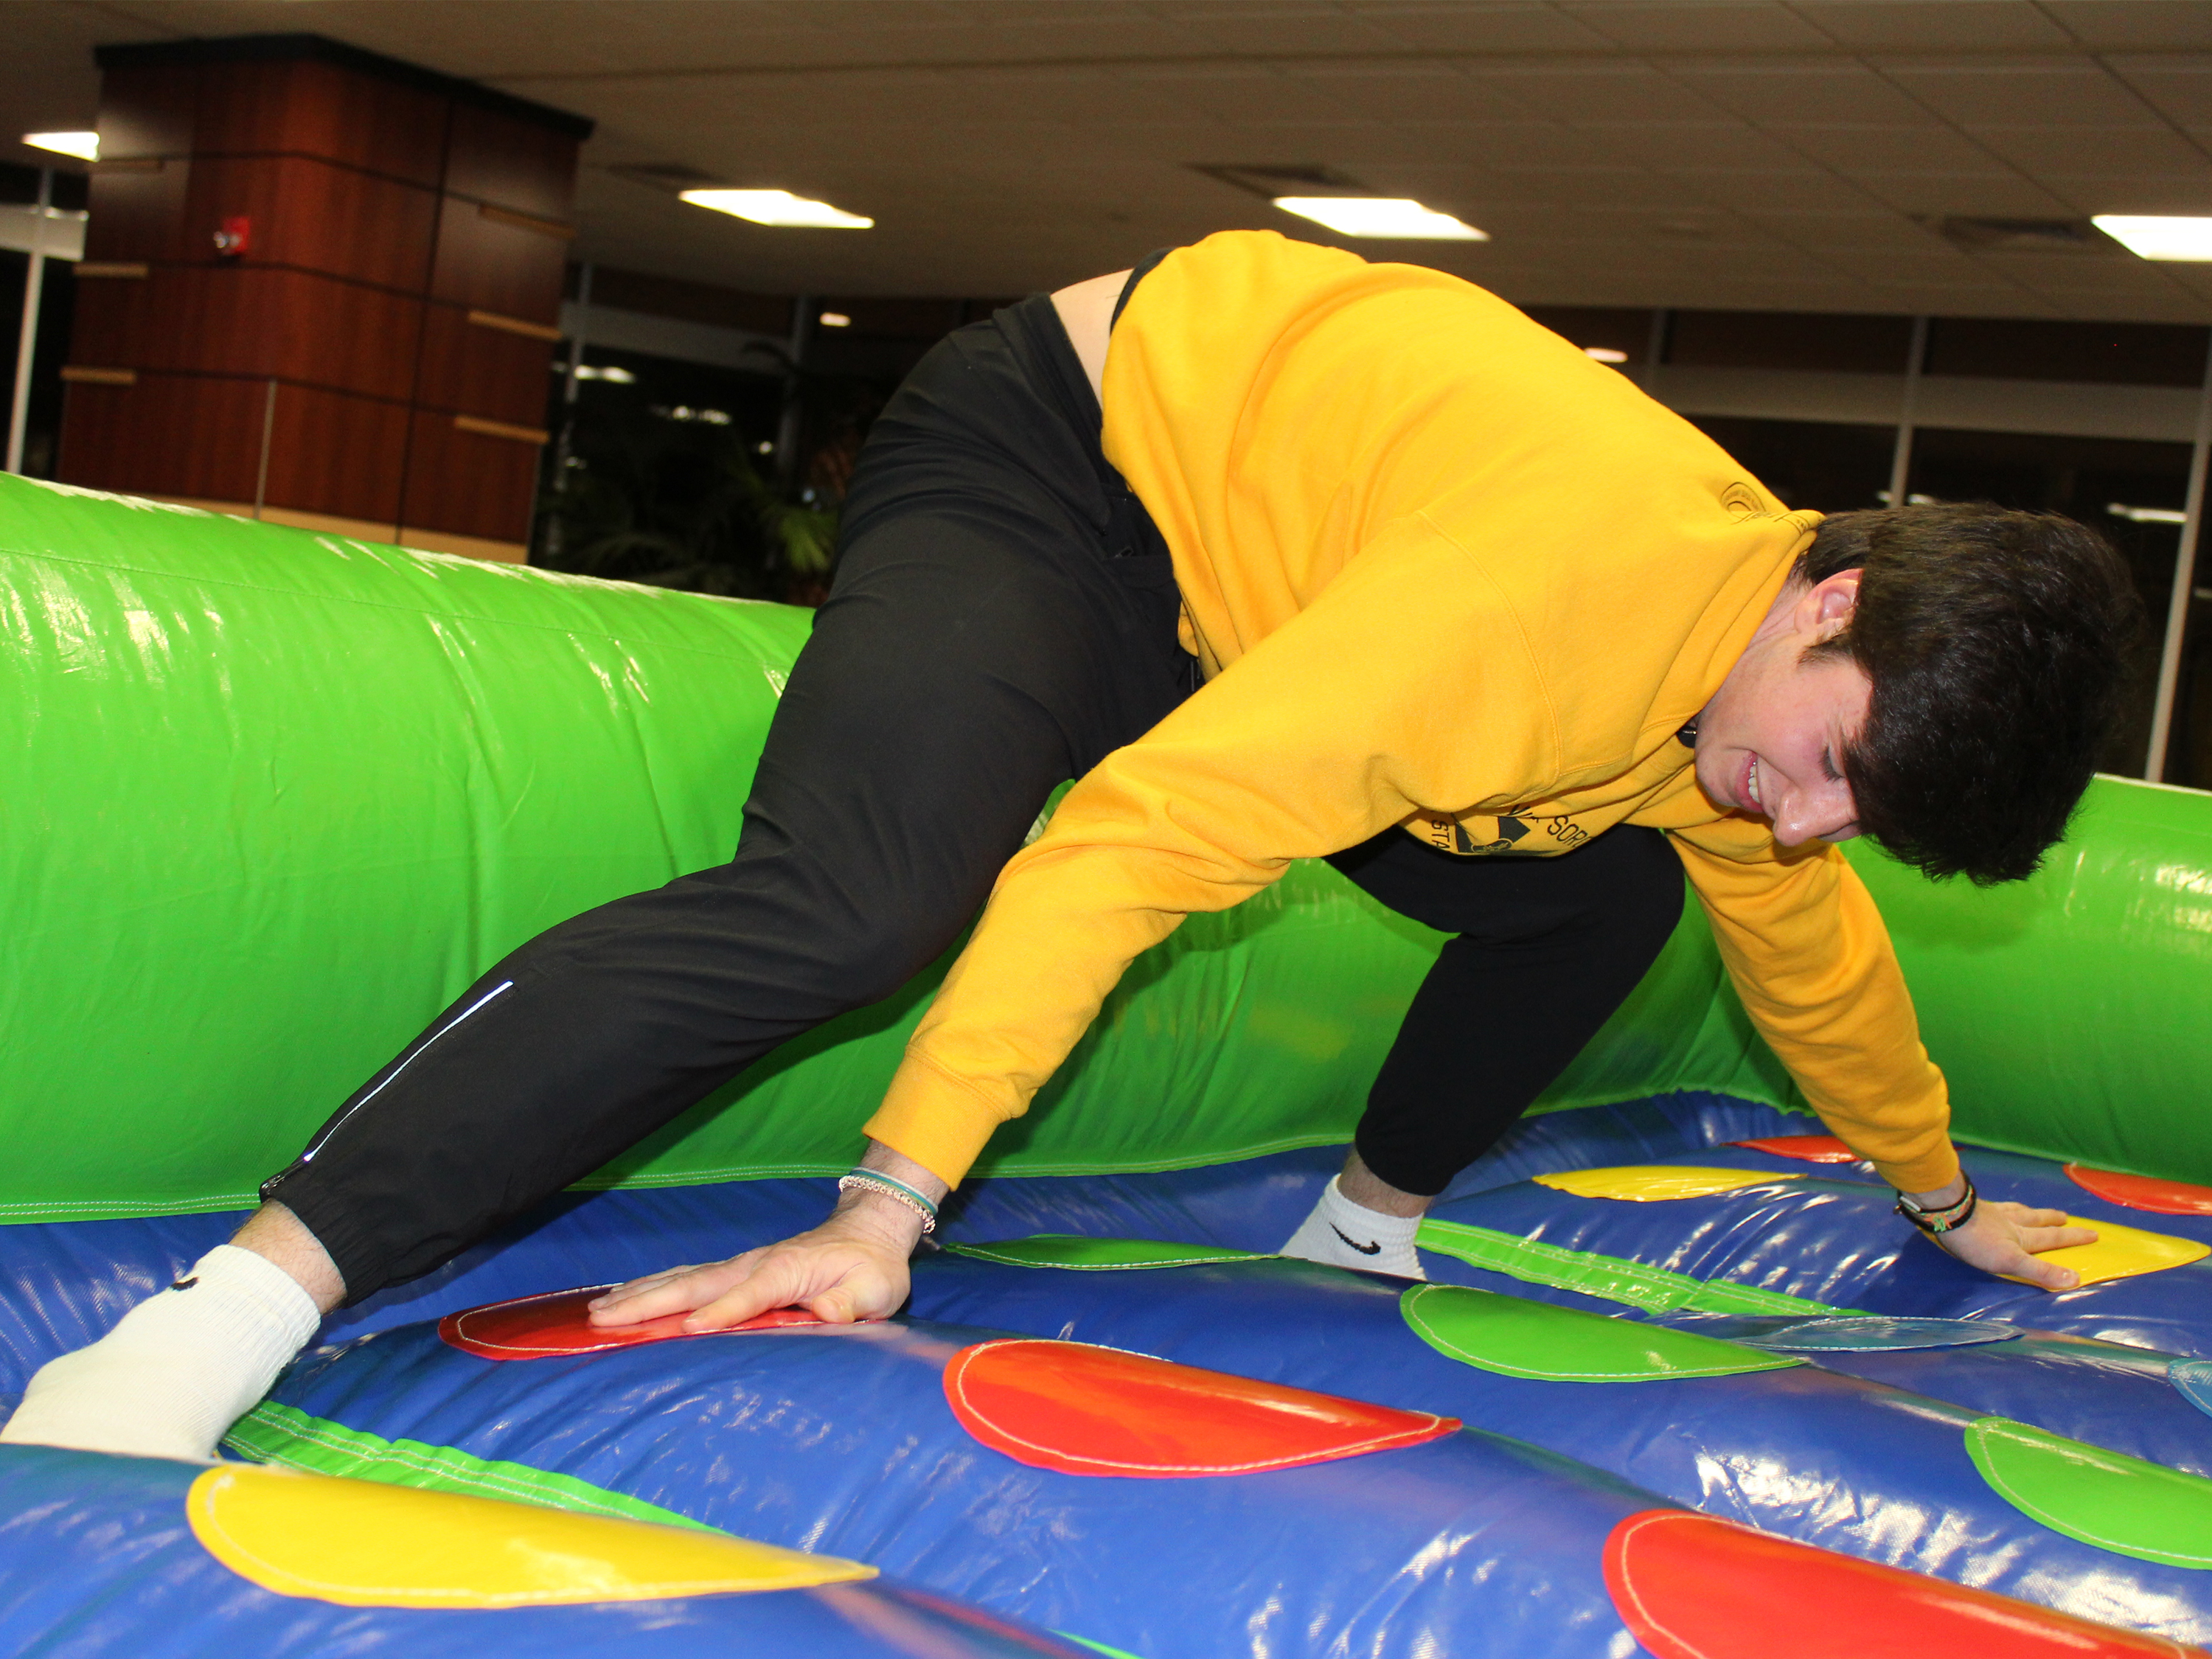 Shockers After Dark student playing twister